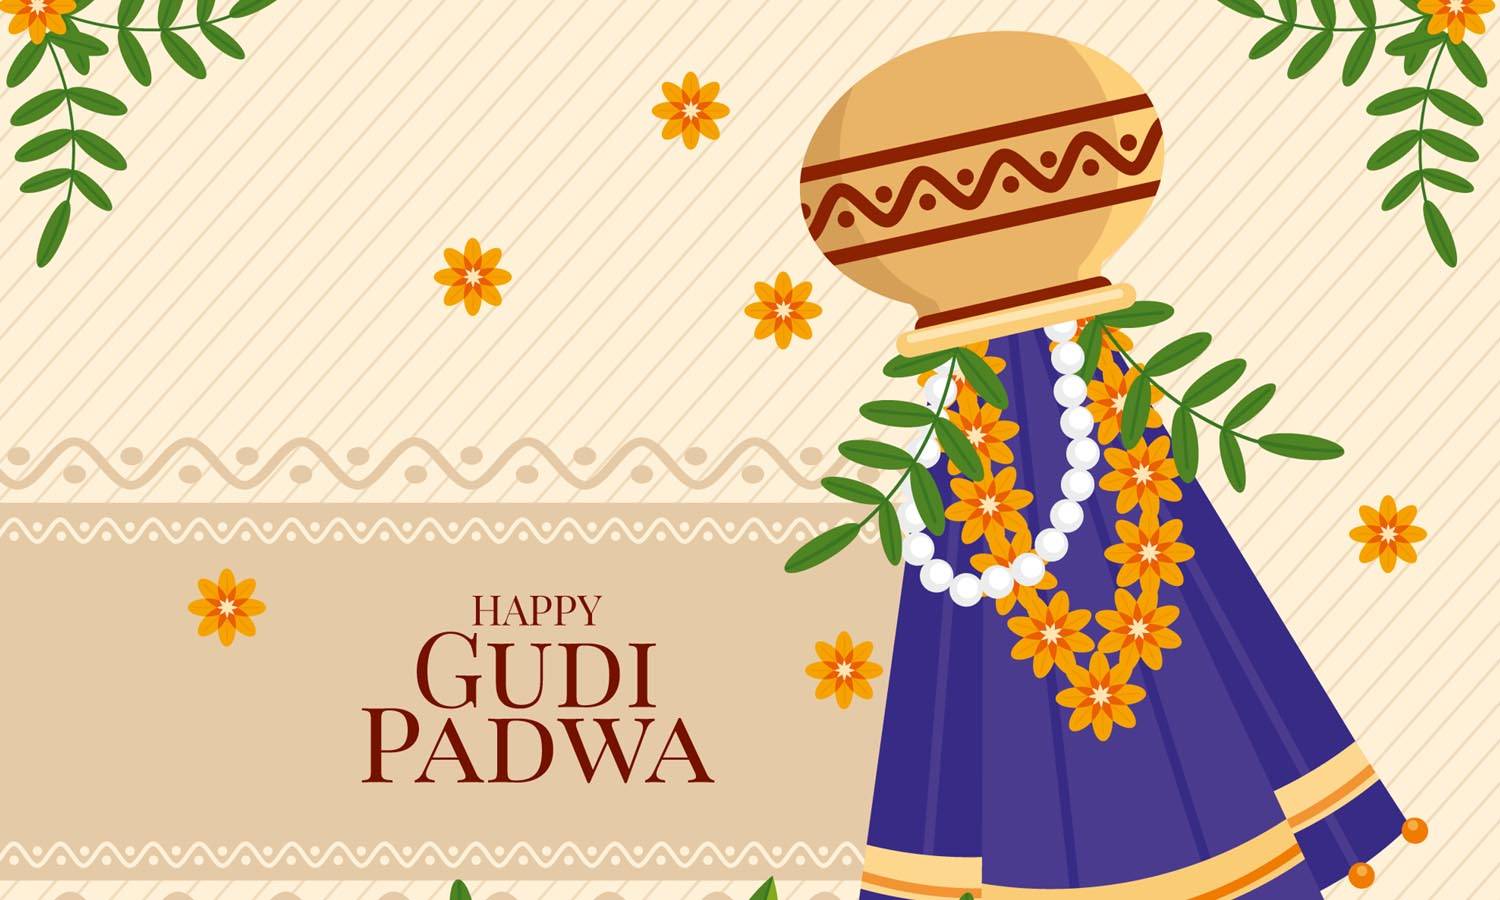 Gudi Padwa images Wishes for Family